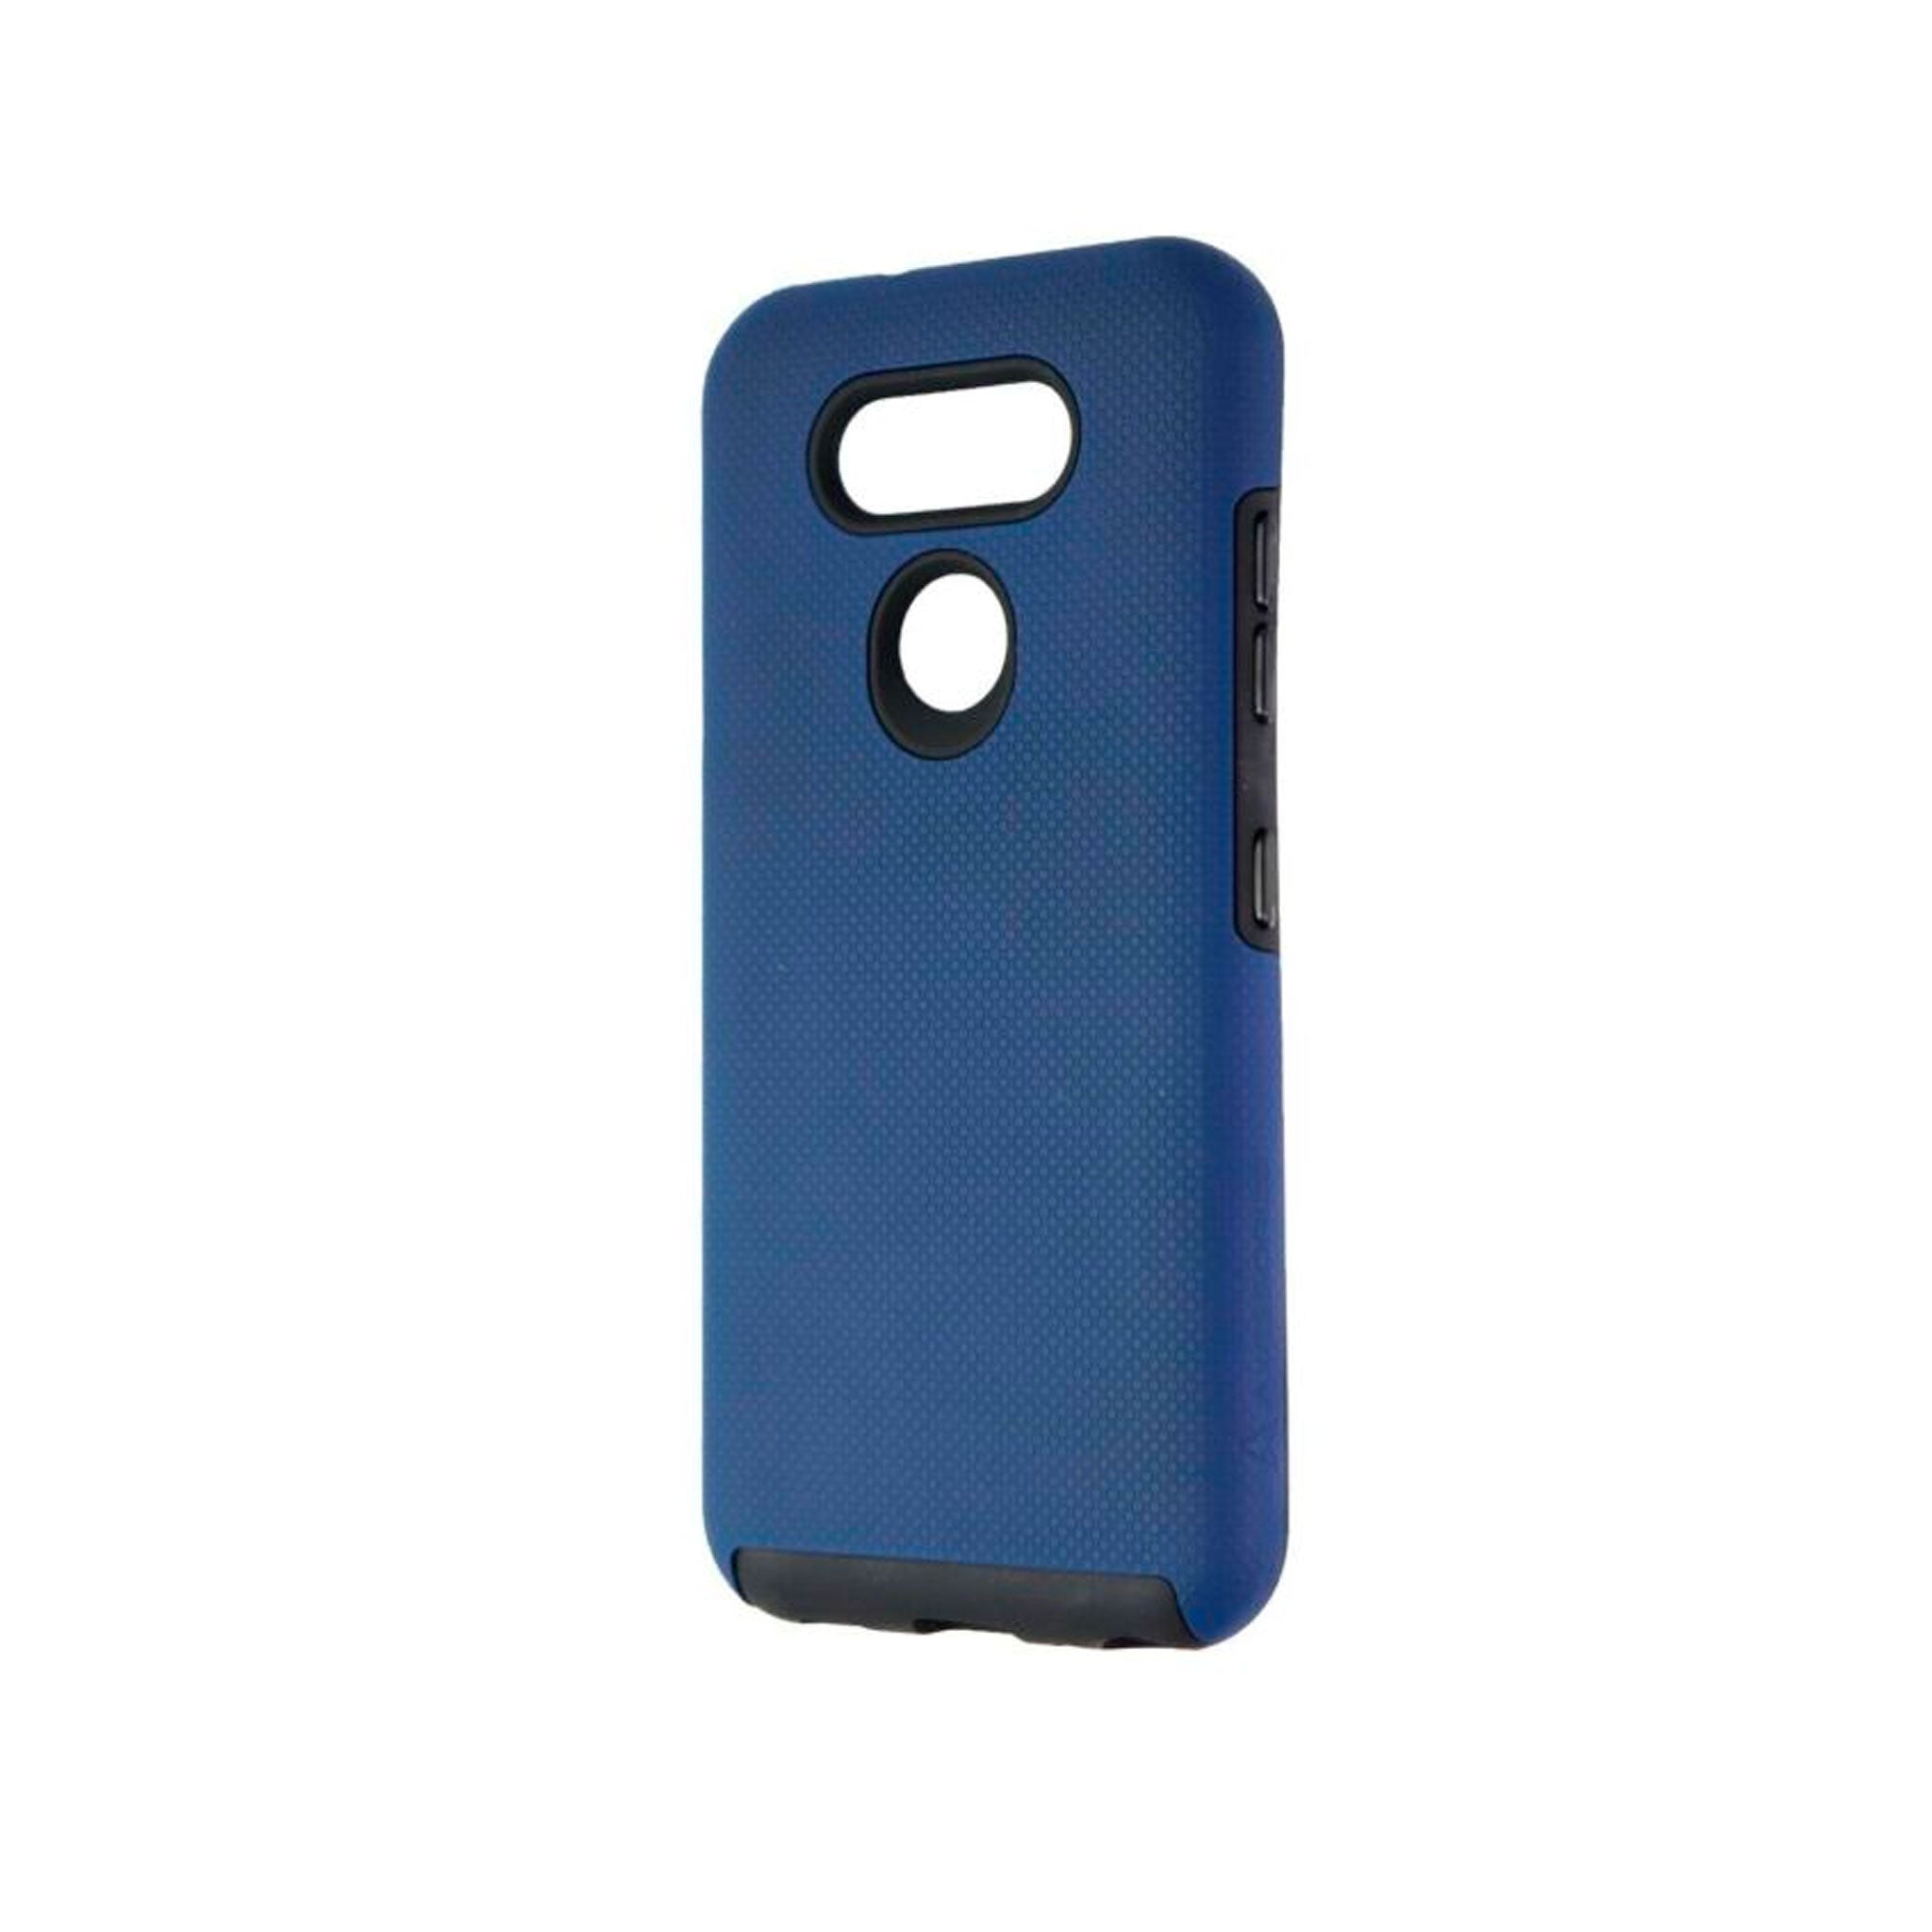 Axessorize - Protech Case For Lg K8x - Blue